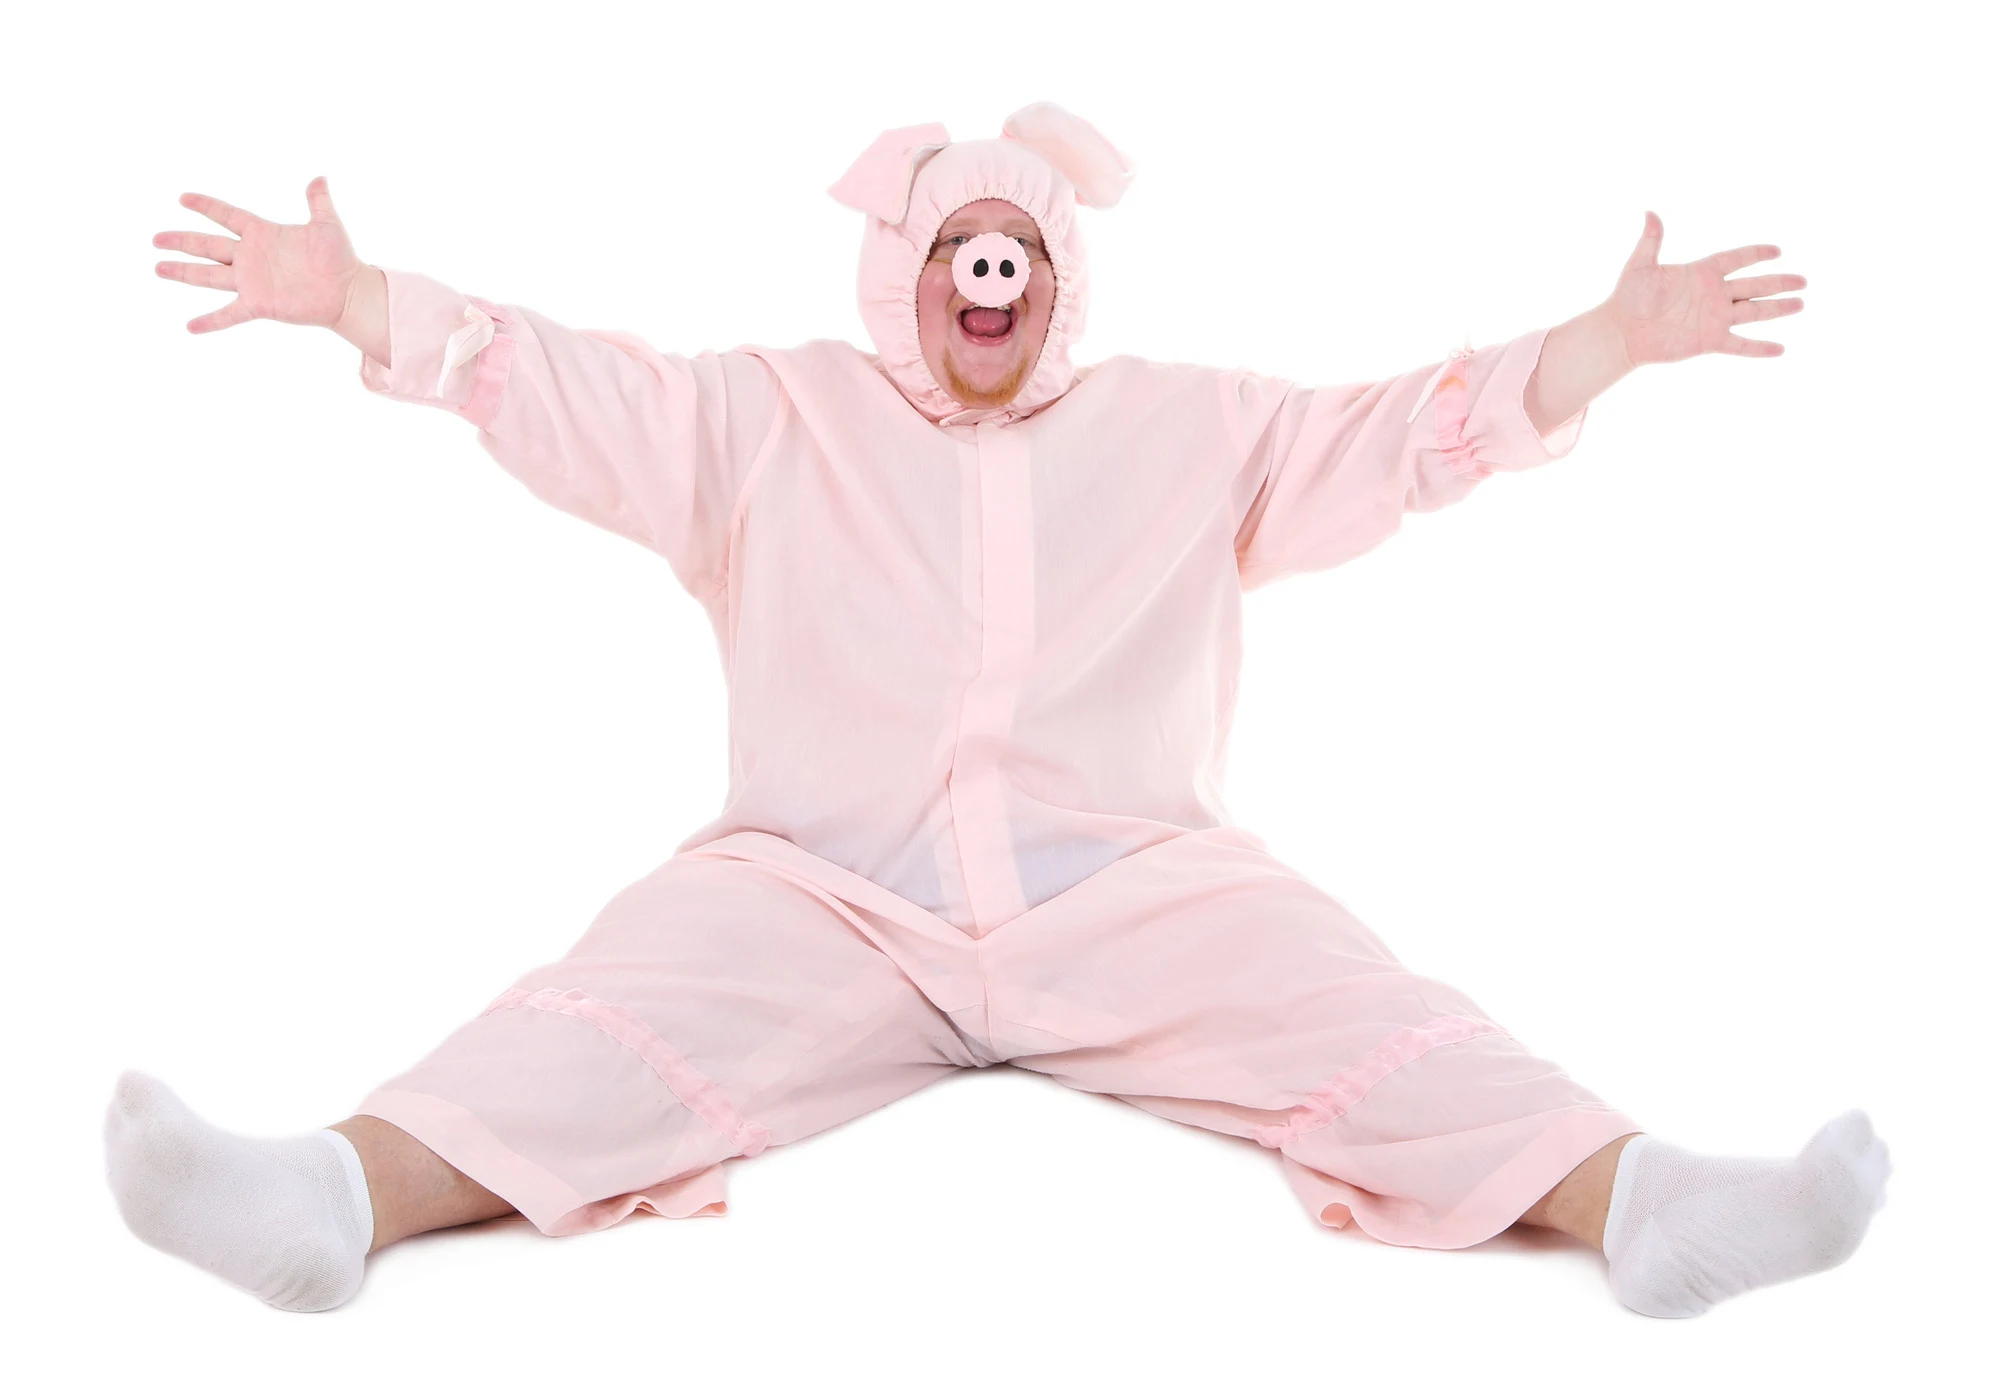 Fat man in pig costume isolated on white